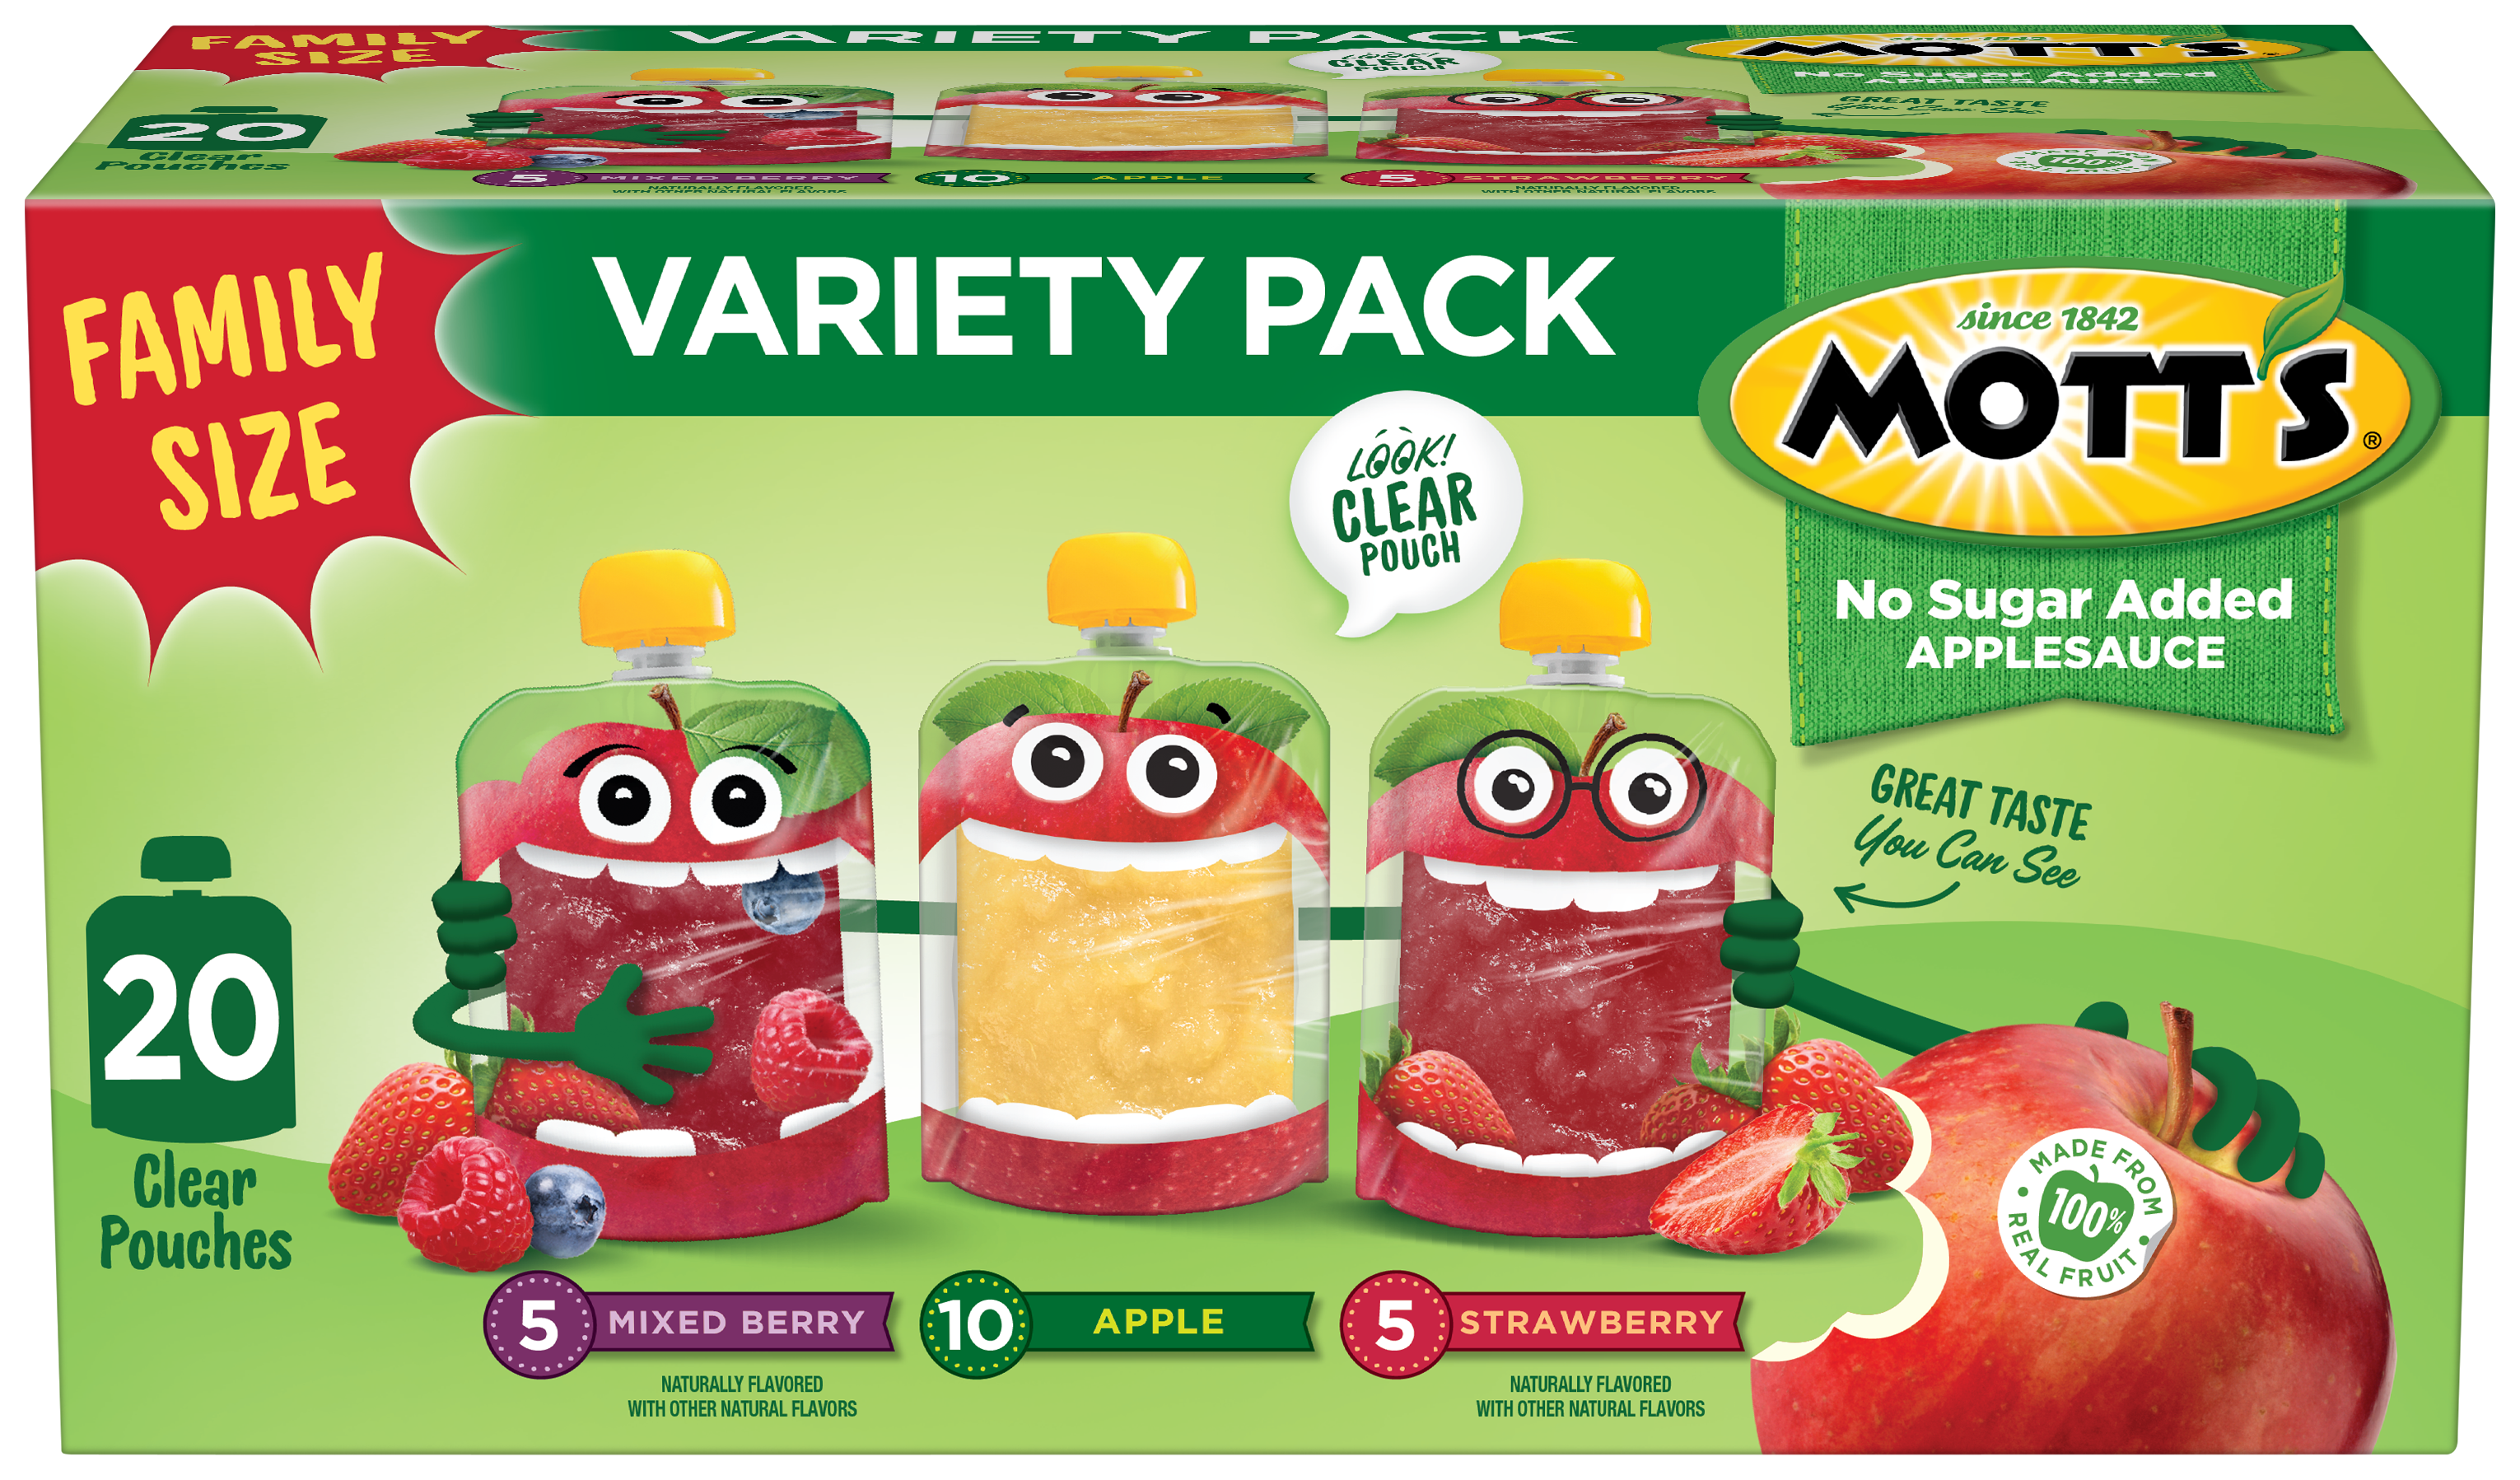 Mott's® No Sugar Added Applesauce Strawberry 3.2oz 20-pack variety pack clear pouches